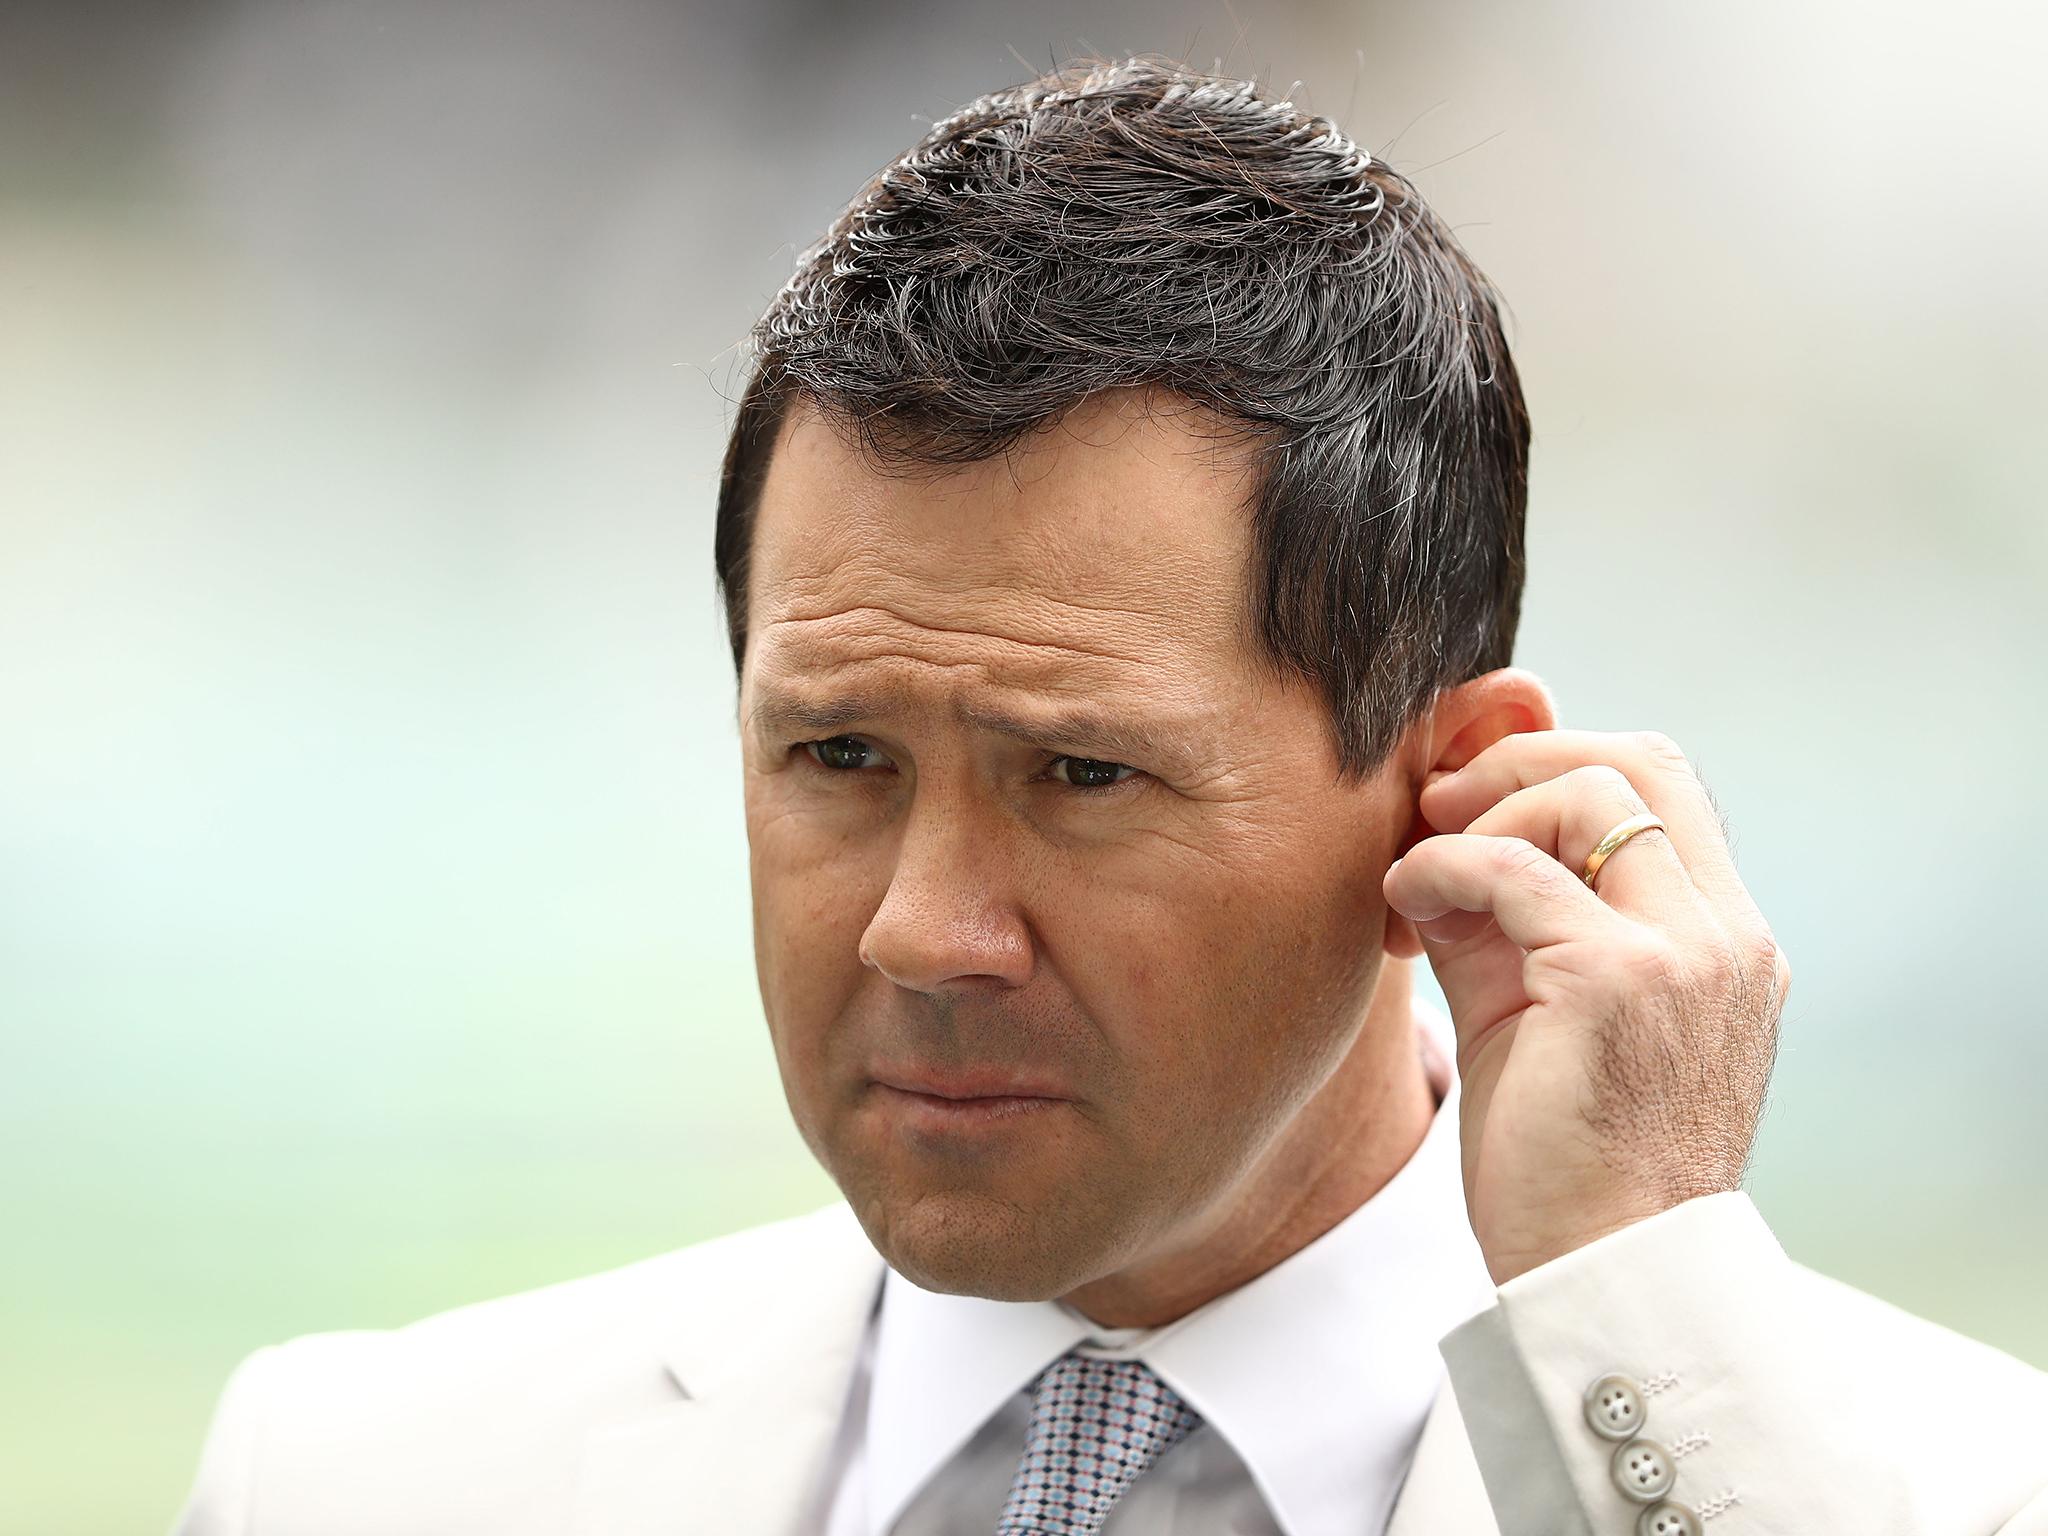 Ricky Ponting will join the Australian coaching staff for the T20 tri-series against England and New Zealand